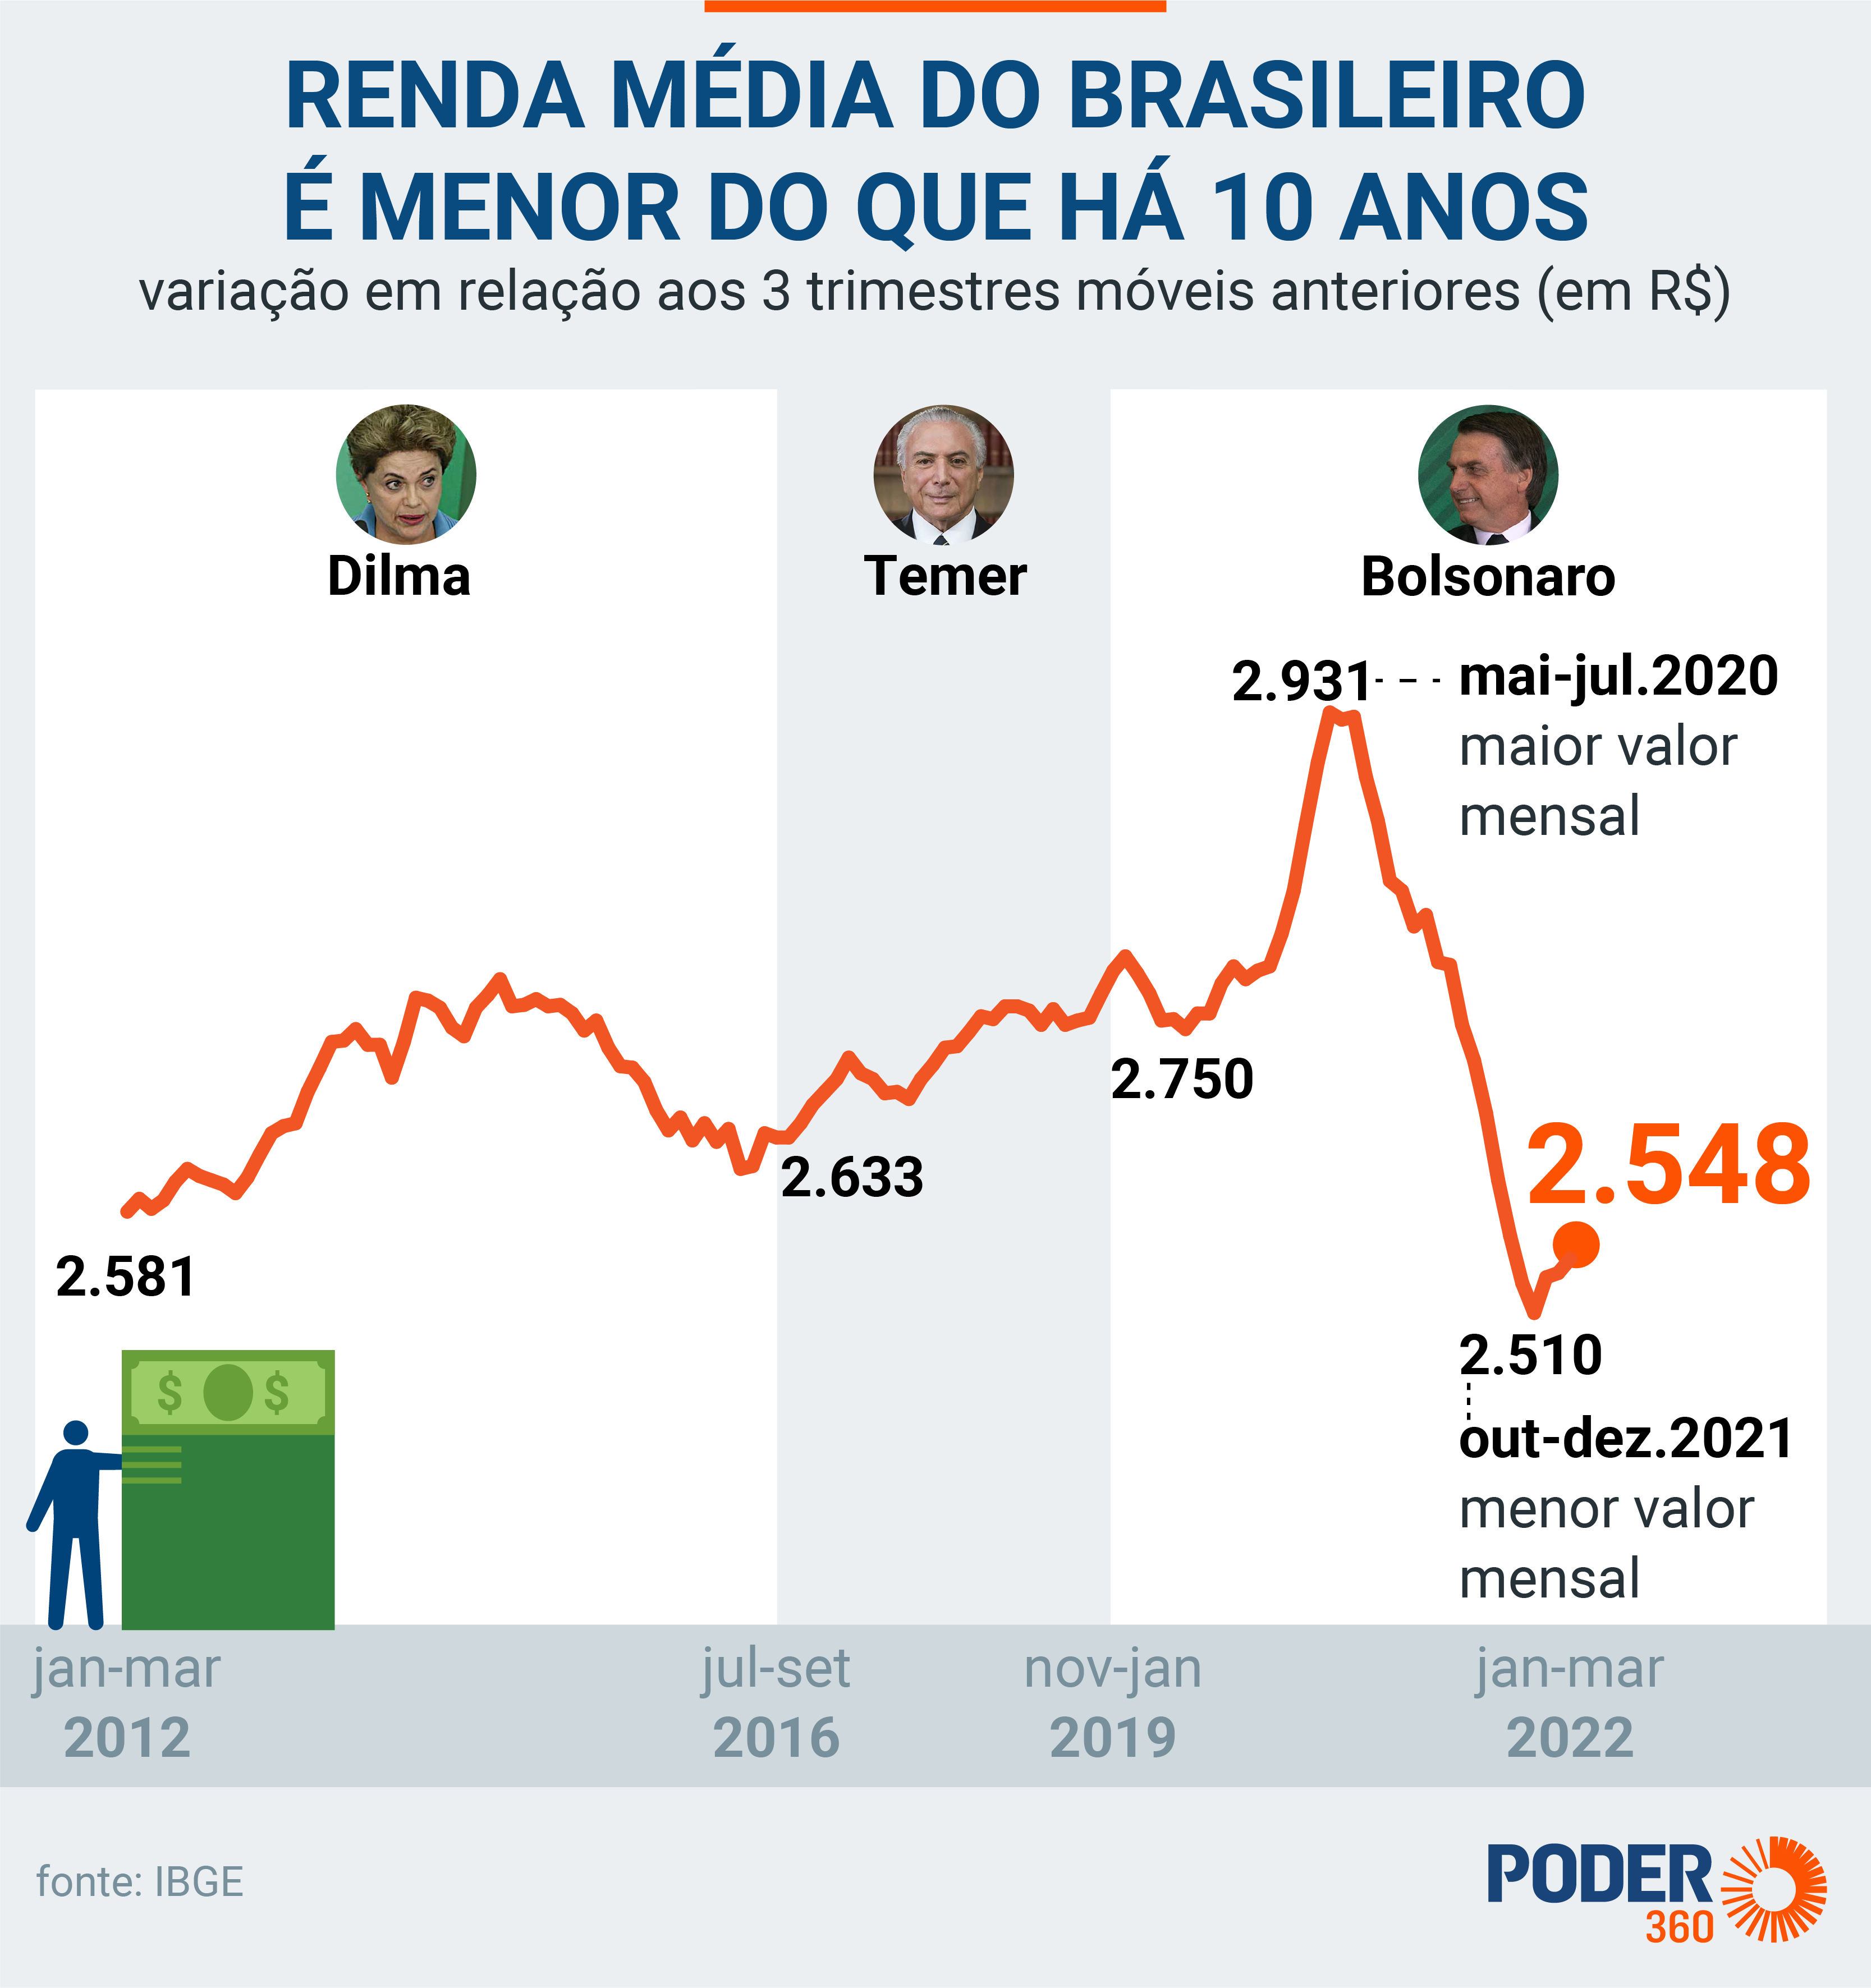 Under Bolsonaro, Brazil experienced the greatest expansion until a pandemic and inflation led to one of the largest drops. (Photo Poder360)